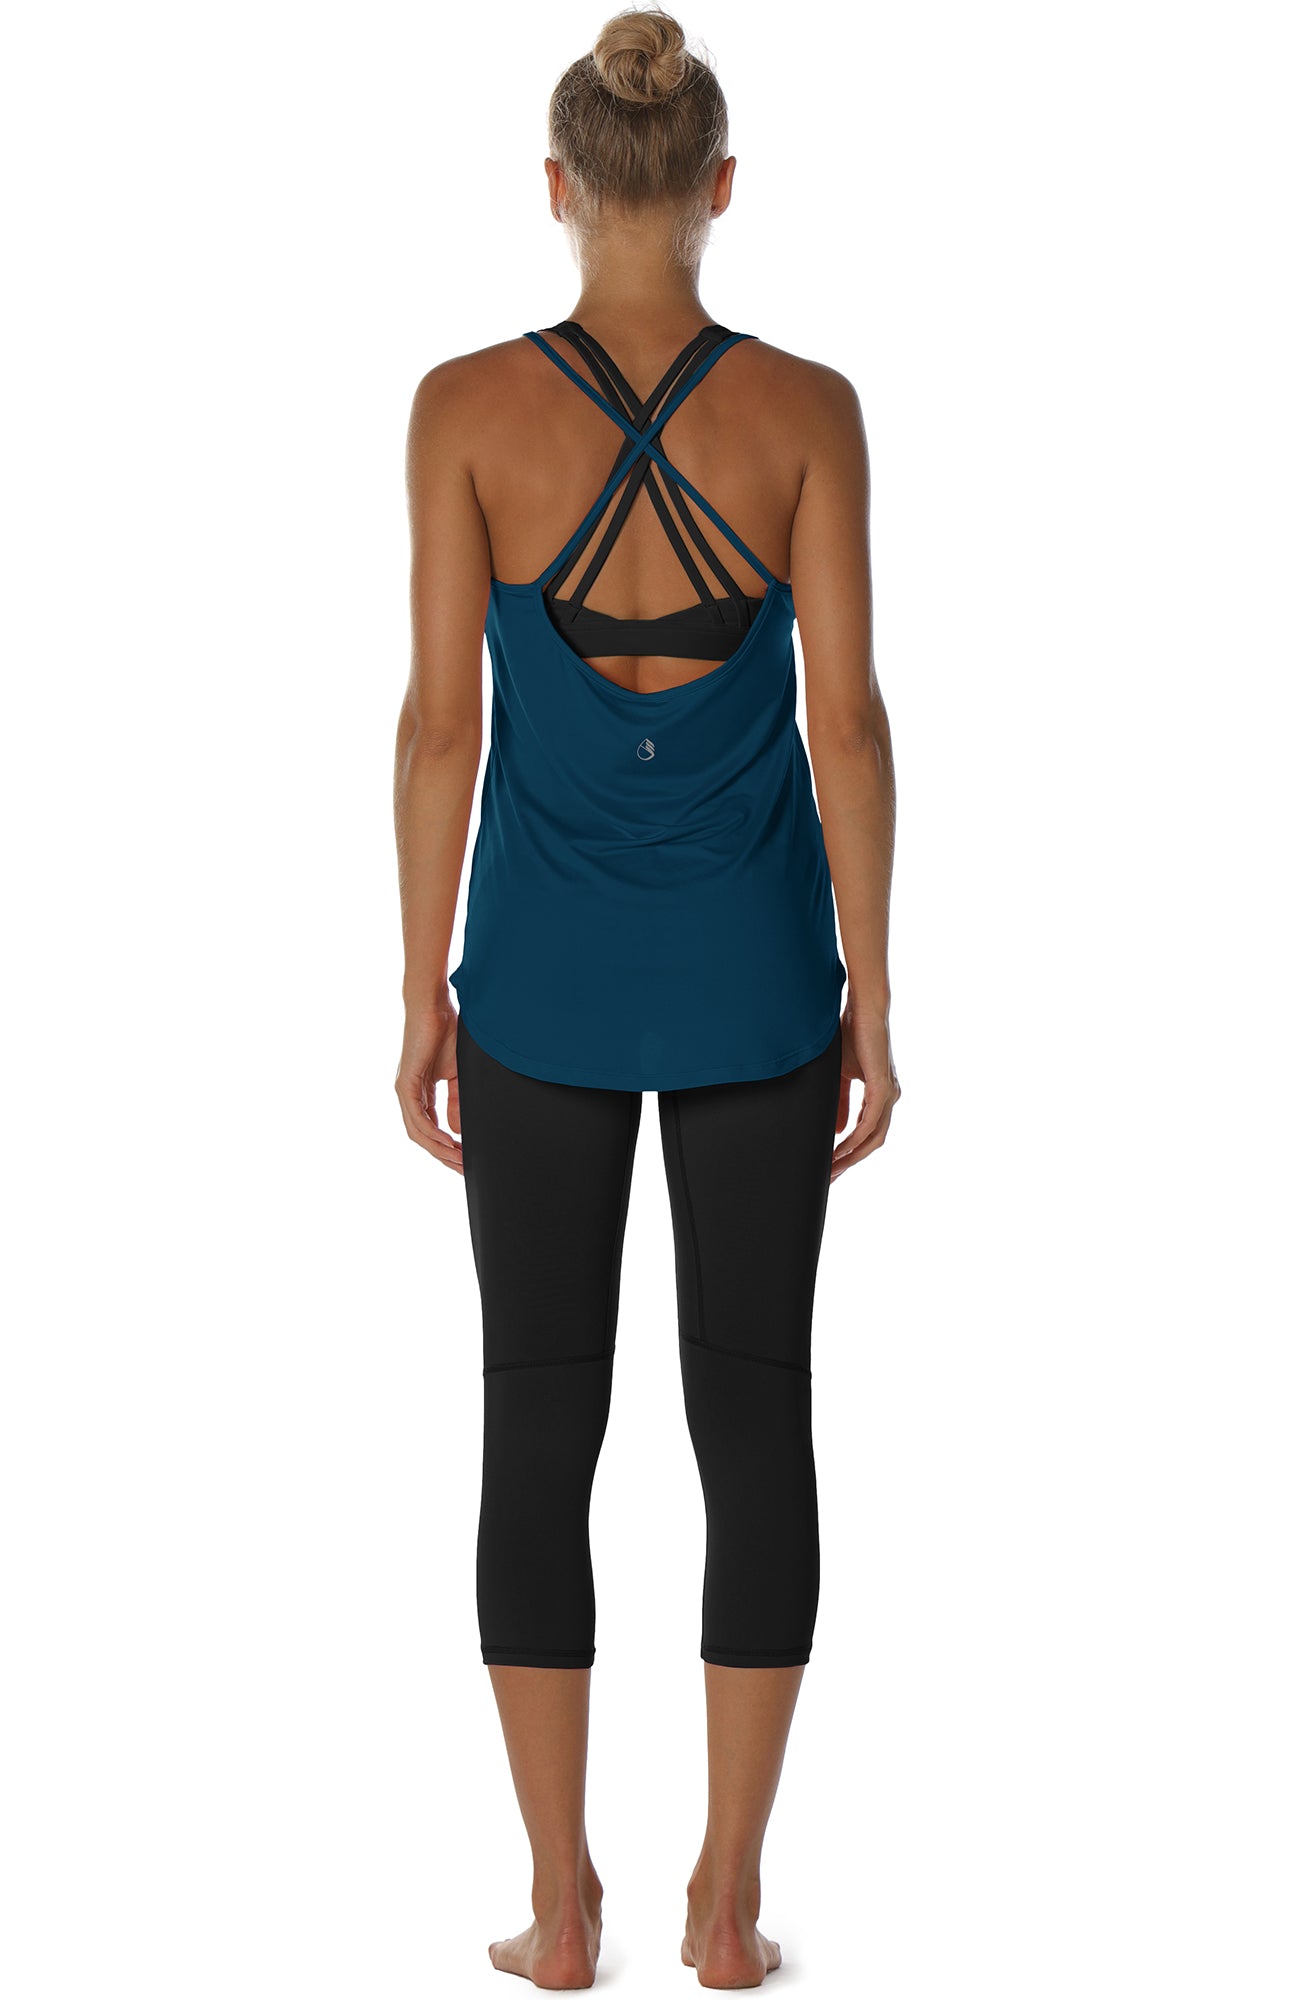 COOrun Workout Tank Tops for Women Open Back Strappy Athletic Tanks Yoga  Tops Gym Shirts